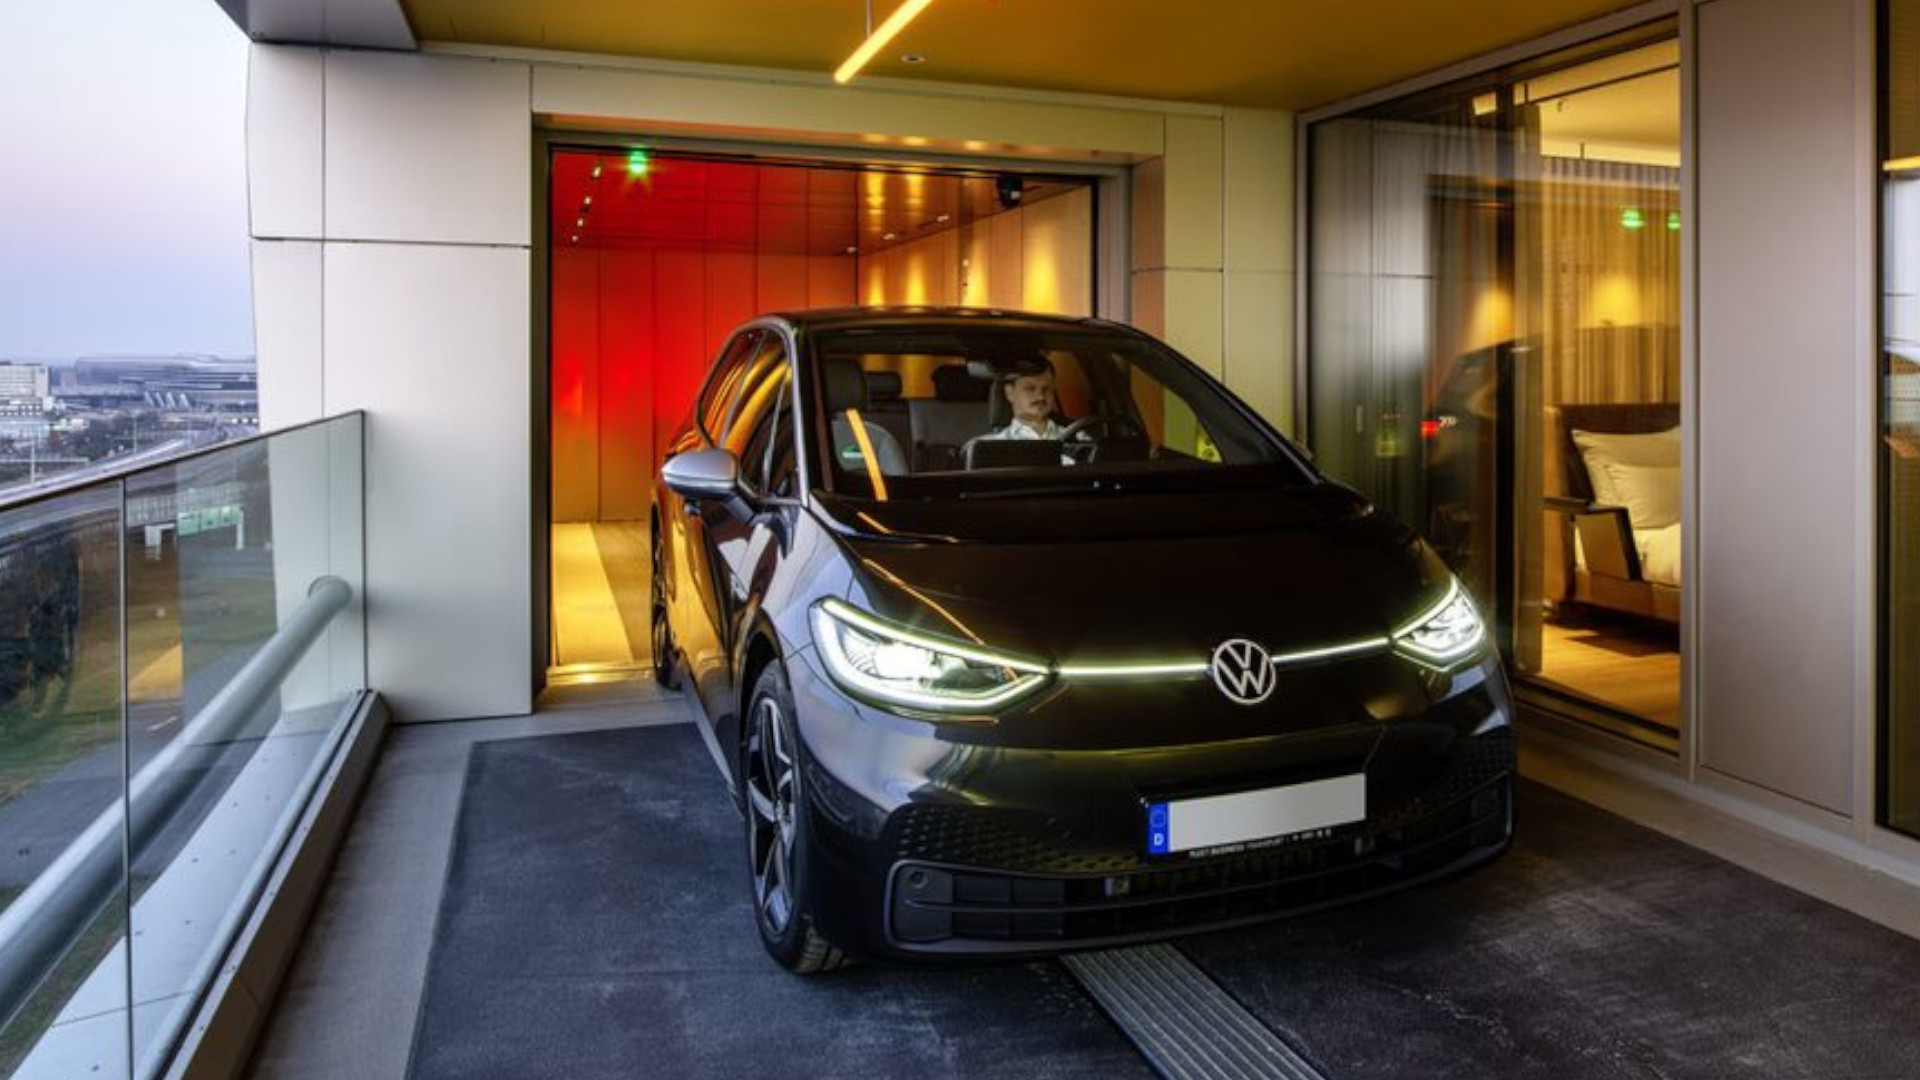 Sweet Dreams: Frankfurt Hotel Lets You Park Your Car on the Balcony